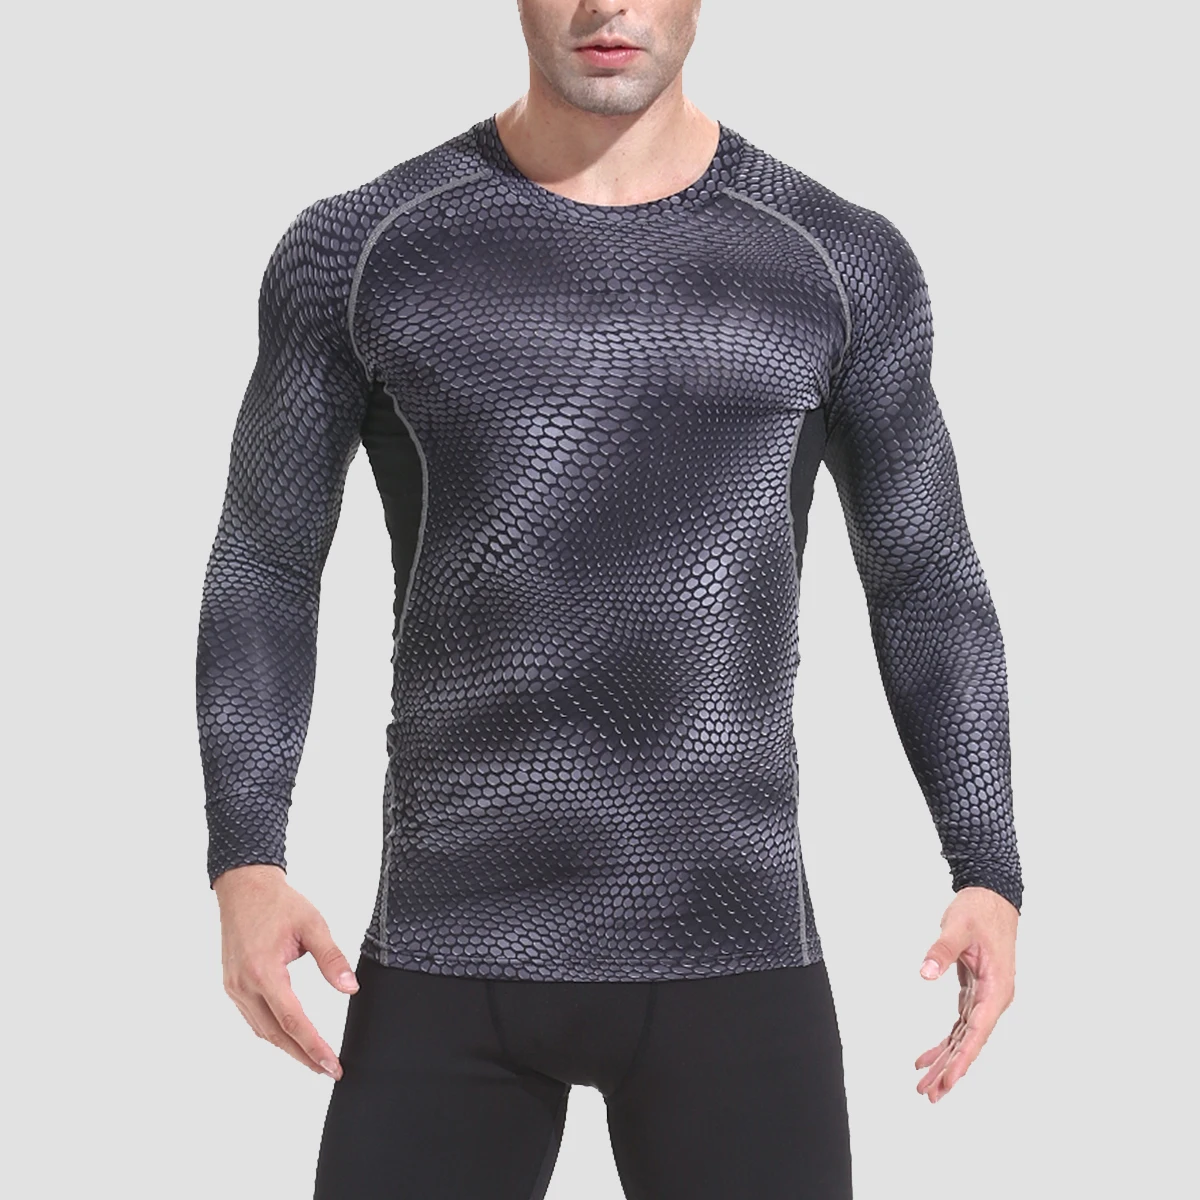 Custom activewear wholesale men body suits sports running and training shirt